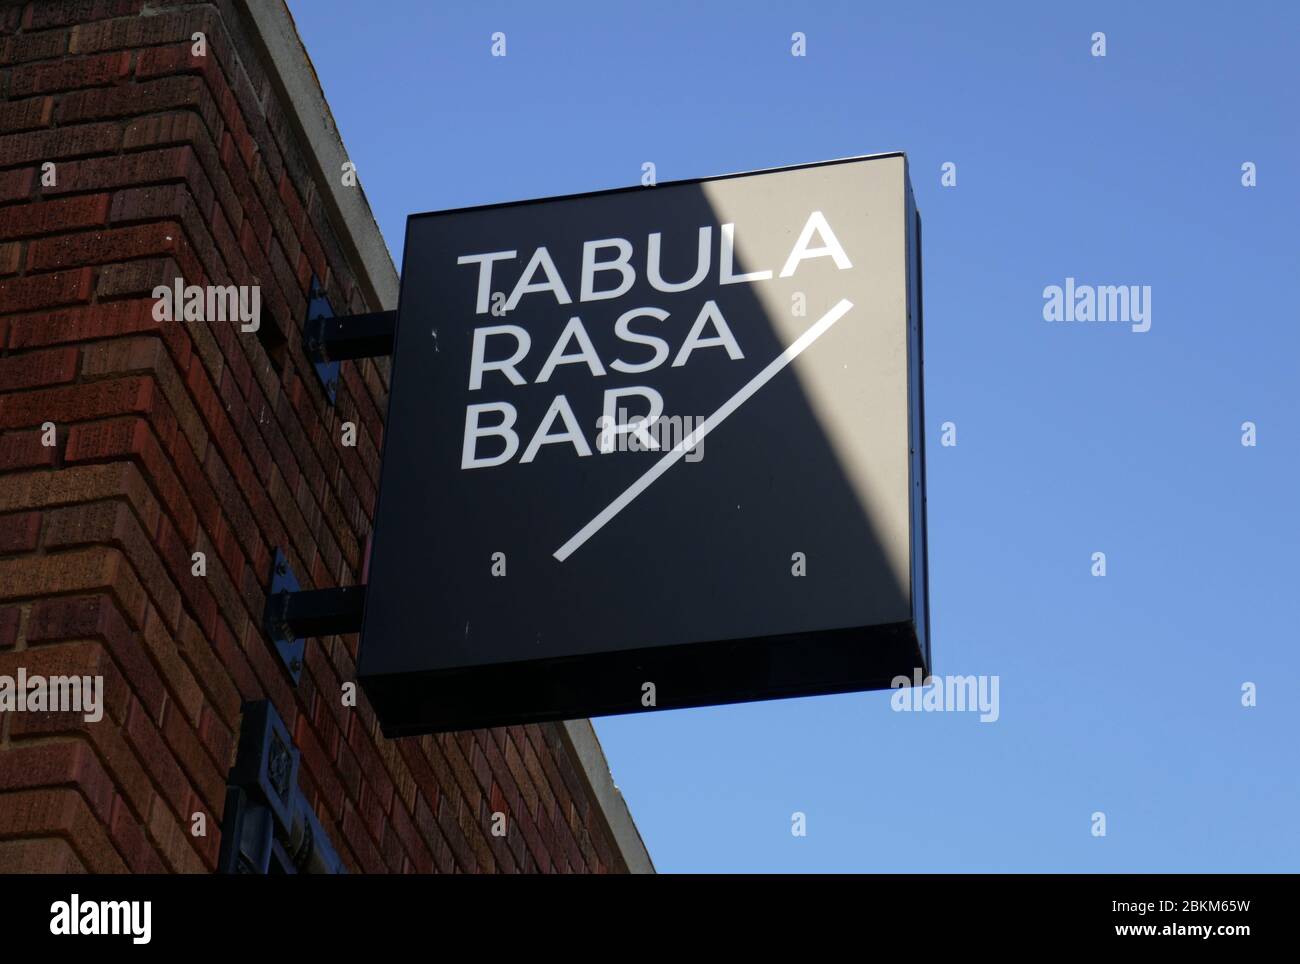 Los Angeles, California, USA 4th May 2020 A general view of atmosphere of Tabula Rasa Bar open for take out orders of food, wine and beer during Coronavirus Covid-19 Pandemic on May 4, 2020 in Los Angeles, California, USA. Photo by Barry King/Alamy Stock Photo Stock Photo